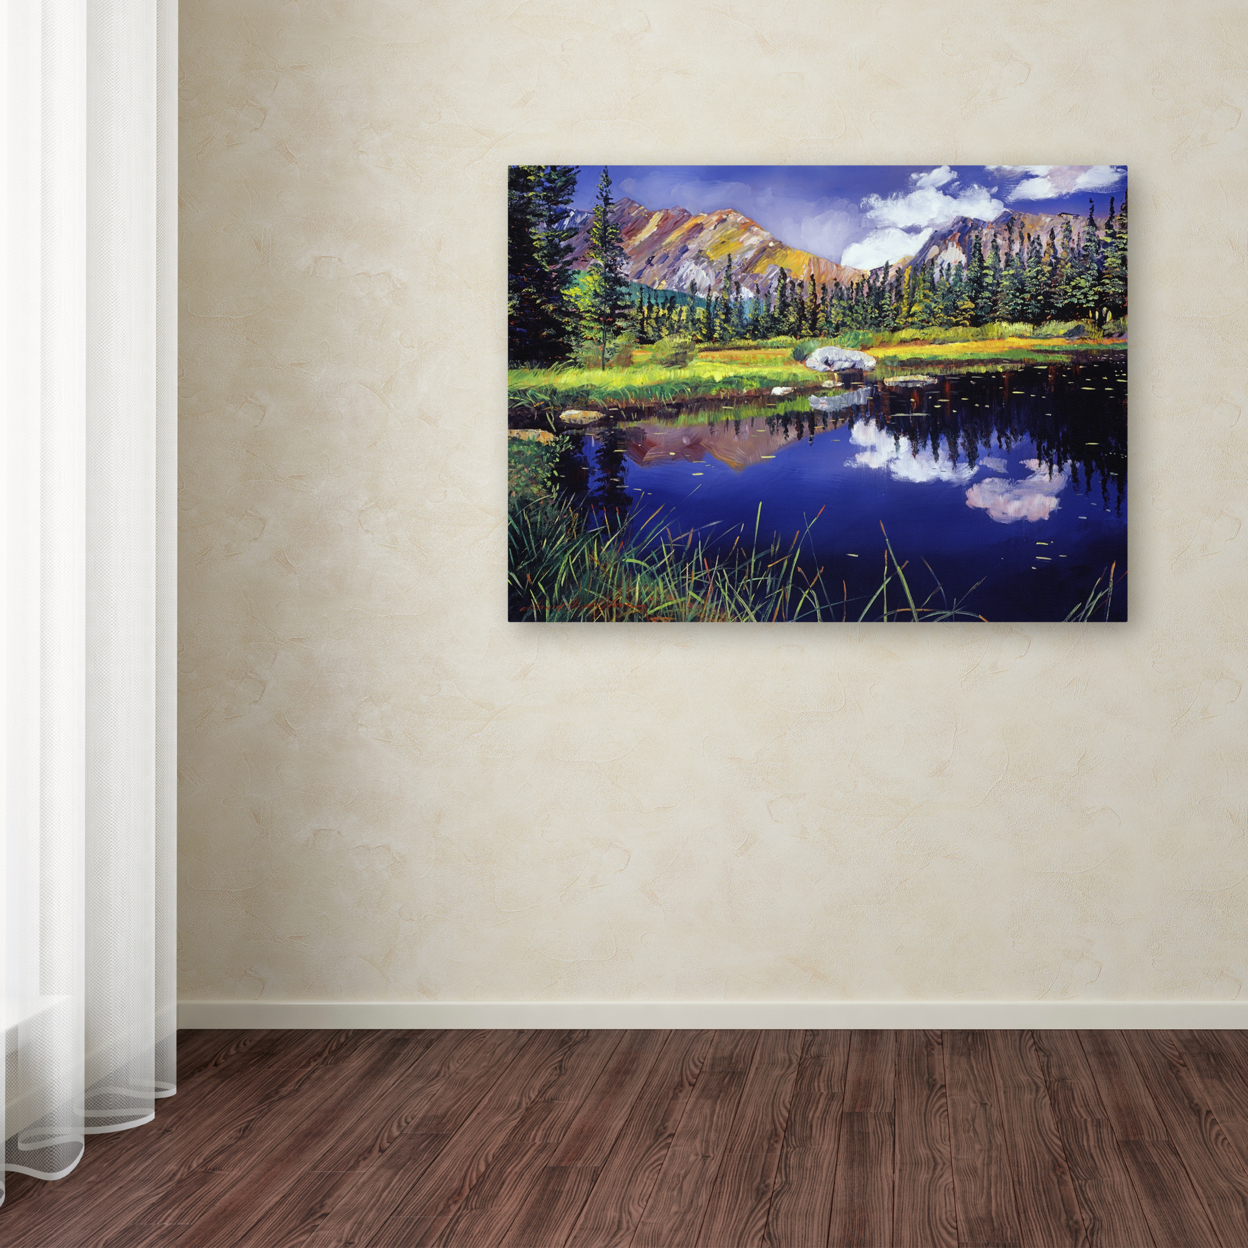 David Lloyd Glover 'Reflections In Solitude' Canvas Wall Art 35 X 47 Inches